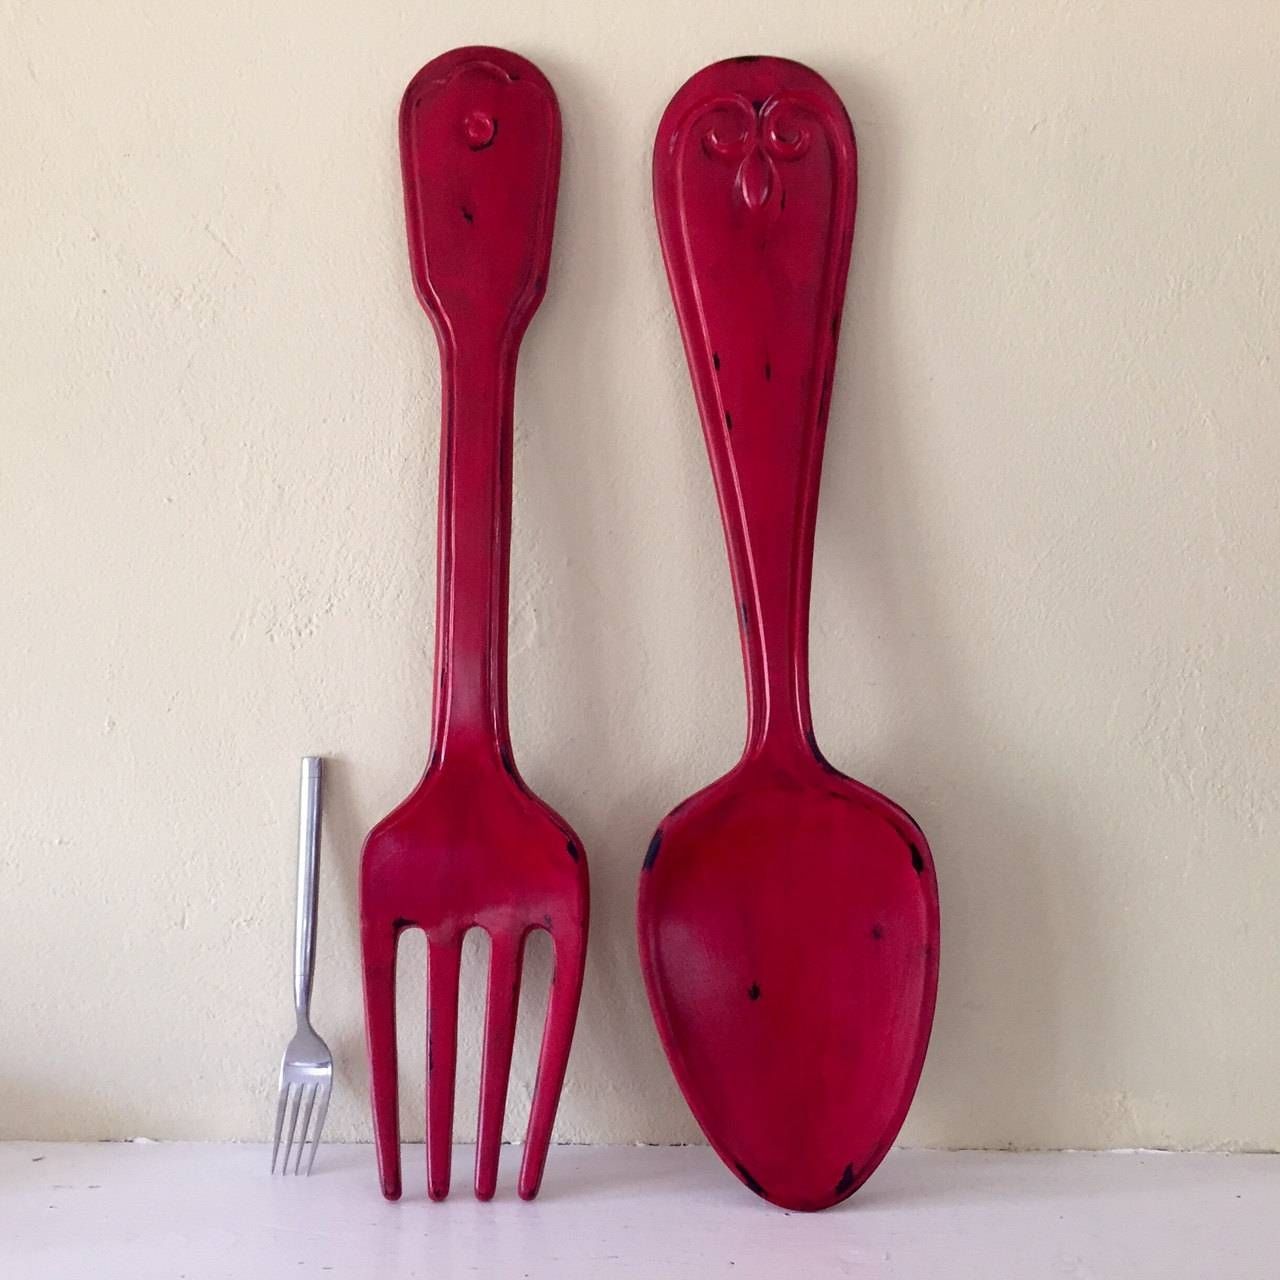 Giant Spoon And Fork Wall Decor : Oversized Spoon And Fork Wall Intended For Most Popular Big Spoon And Fork Decors (View 12 of 25)